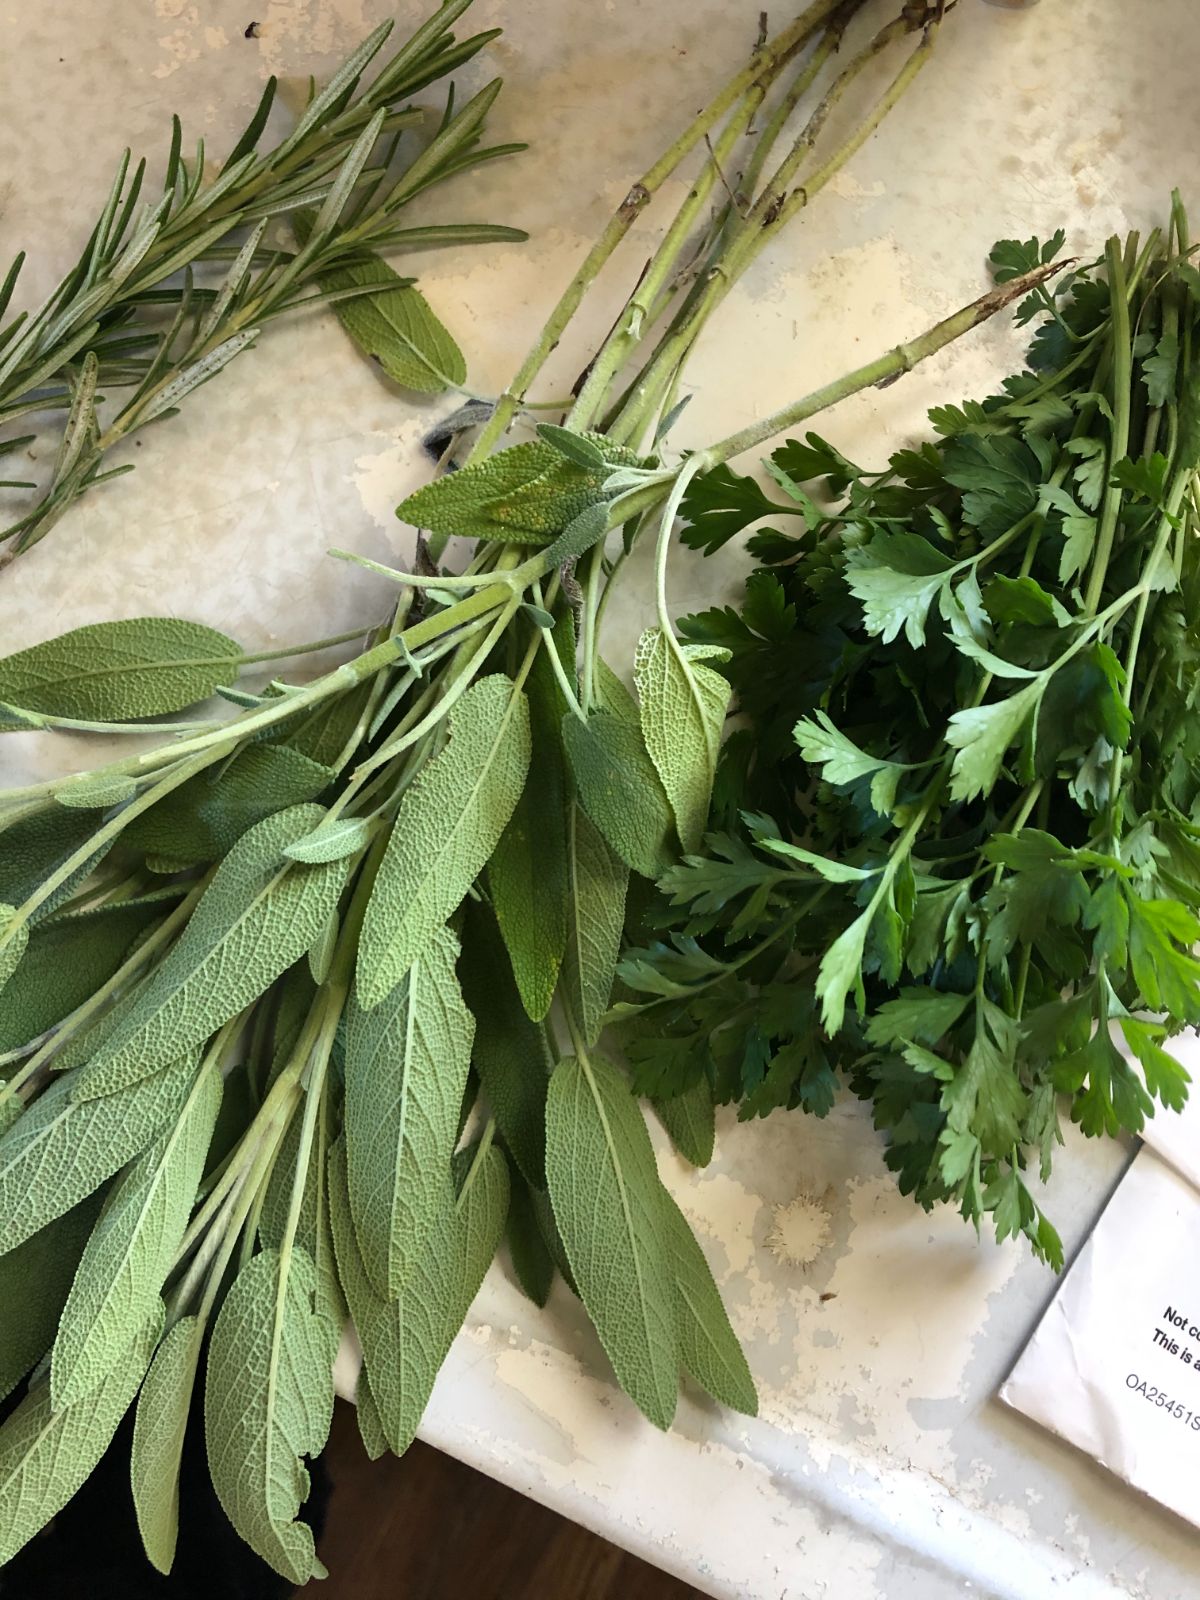 Fresh herbs being bundled for drying